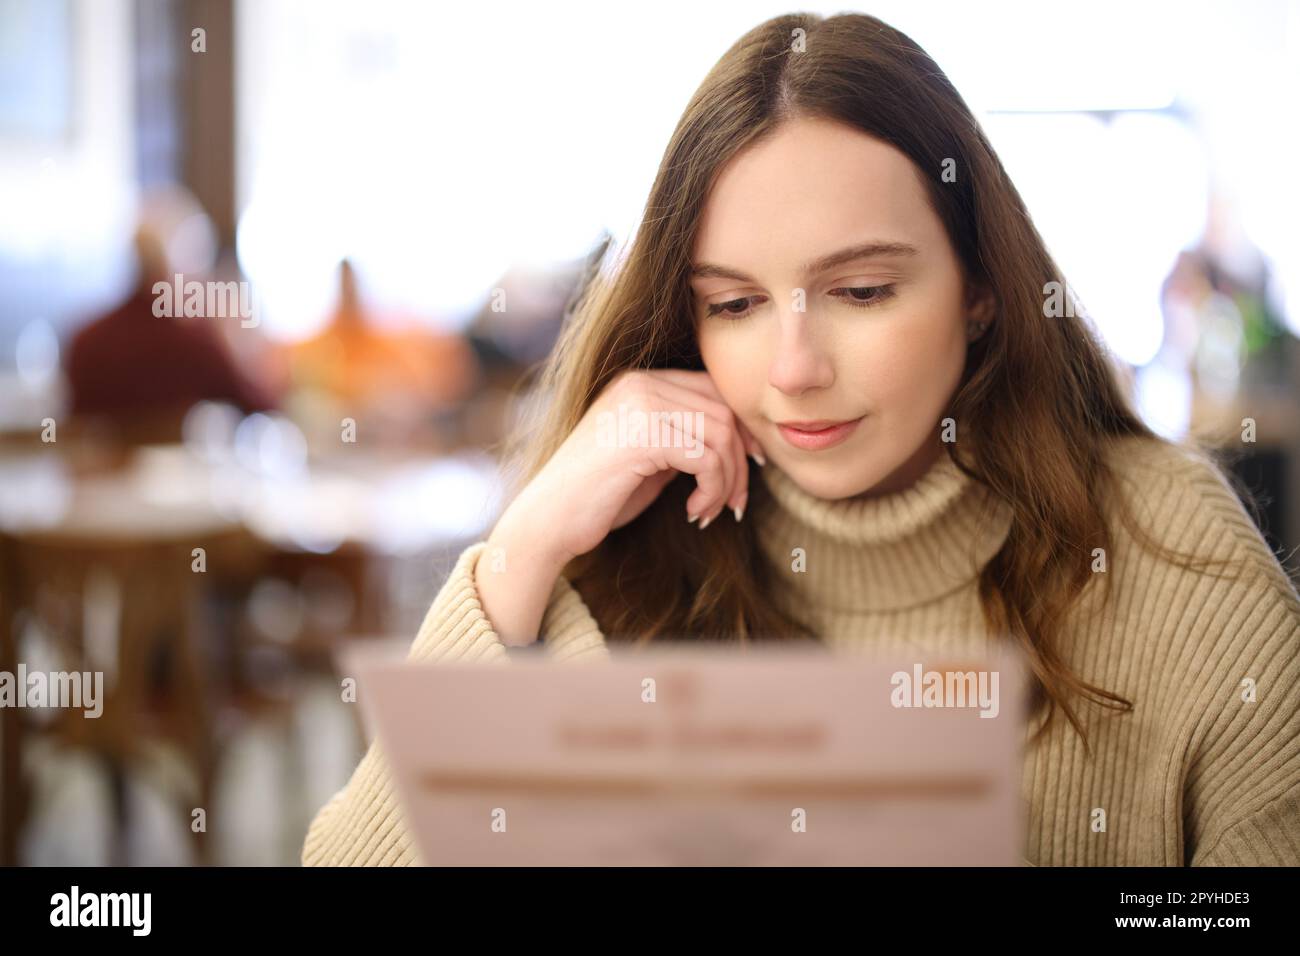 Woman reading menu in a restaurant Stock Photo - Alamy